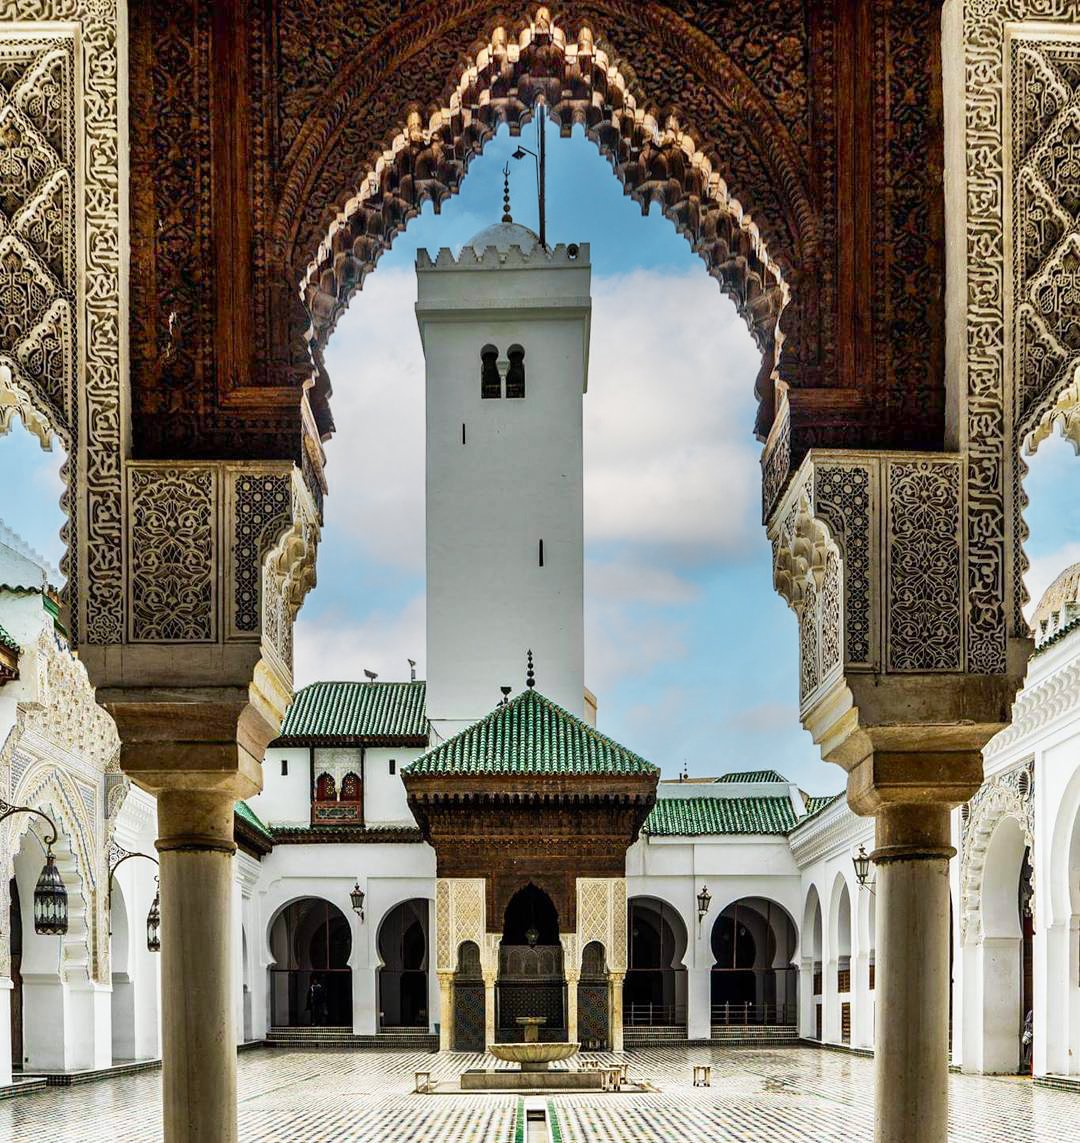 Al-Qarawiyyin courtyard with green and white floor mosaics, a fountain, arches, and a view of a mosque and its minaret in the background.